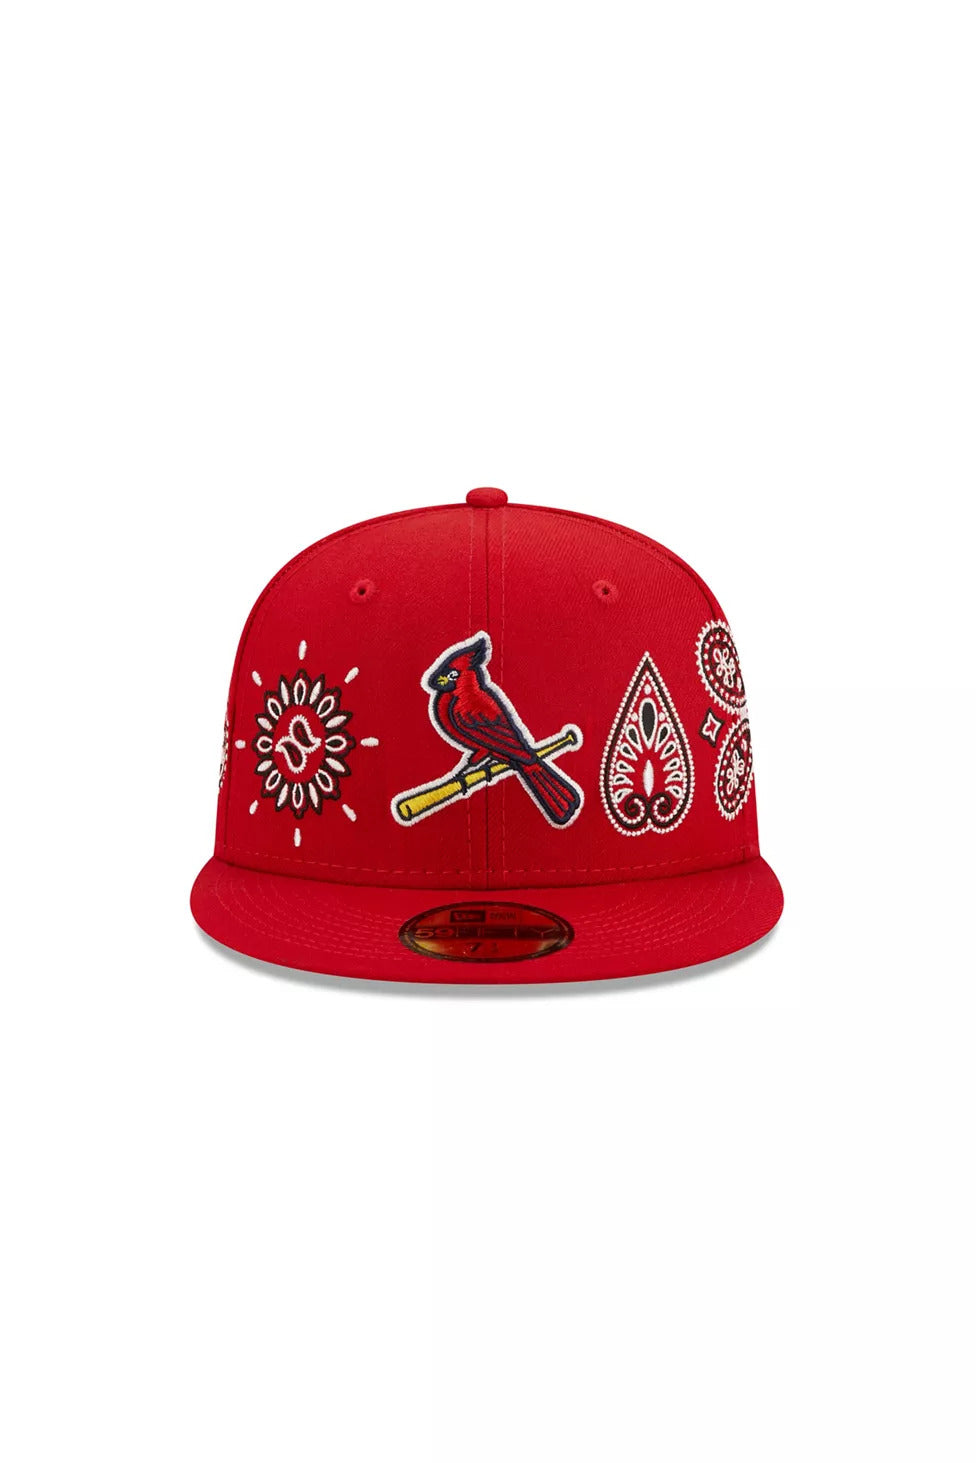 Exclusive Fitted New Era 7 3/4 St Louis Cardinals Cap Hat Mint Red Teal '57  ASG